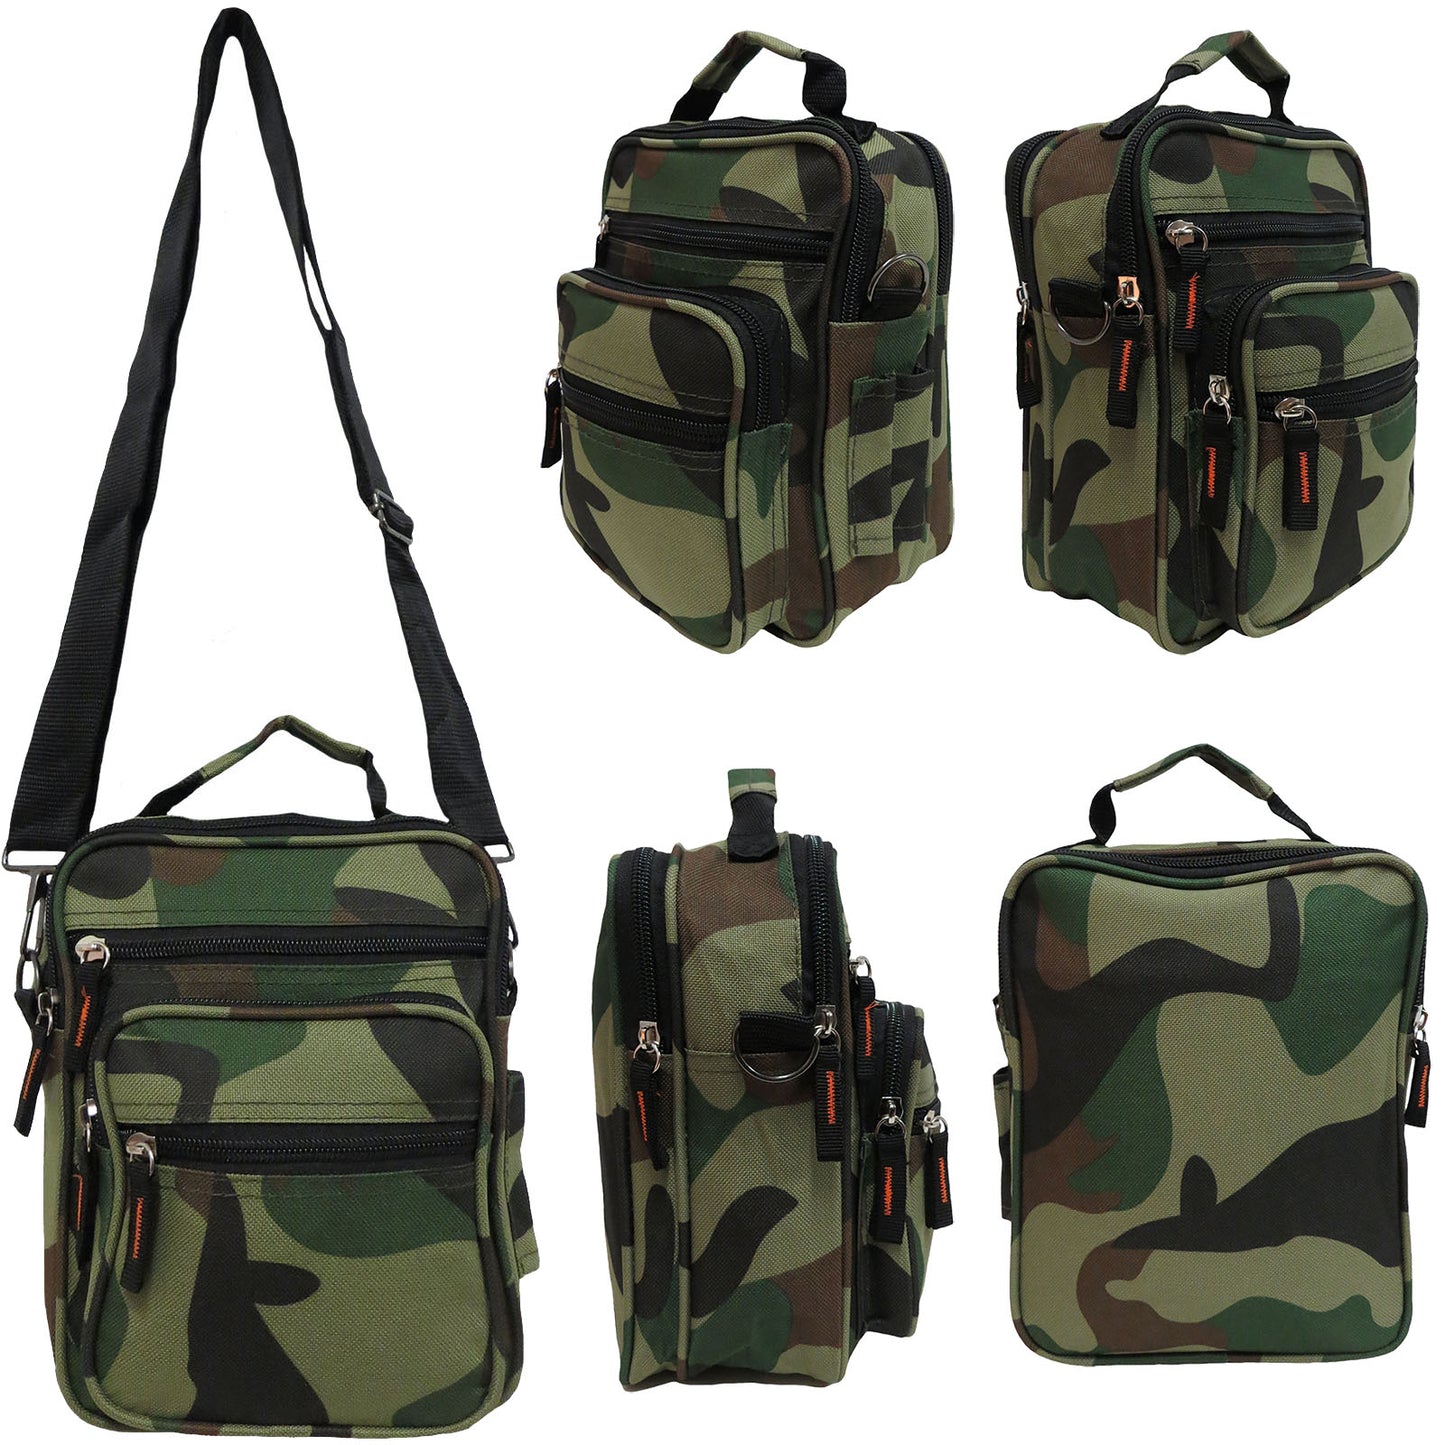 Camouflage Convertible Cross Body Wholesale Messenger Bag Fanny Pack Alessa Jamie